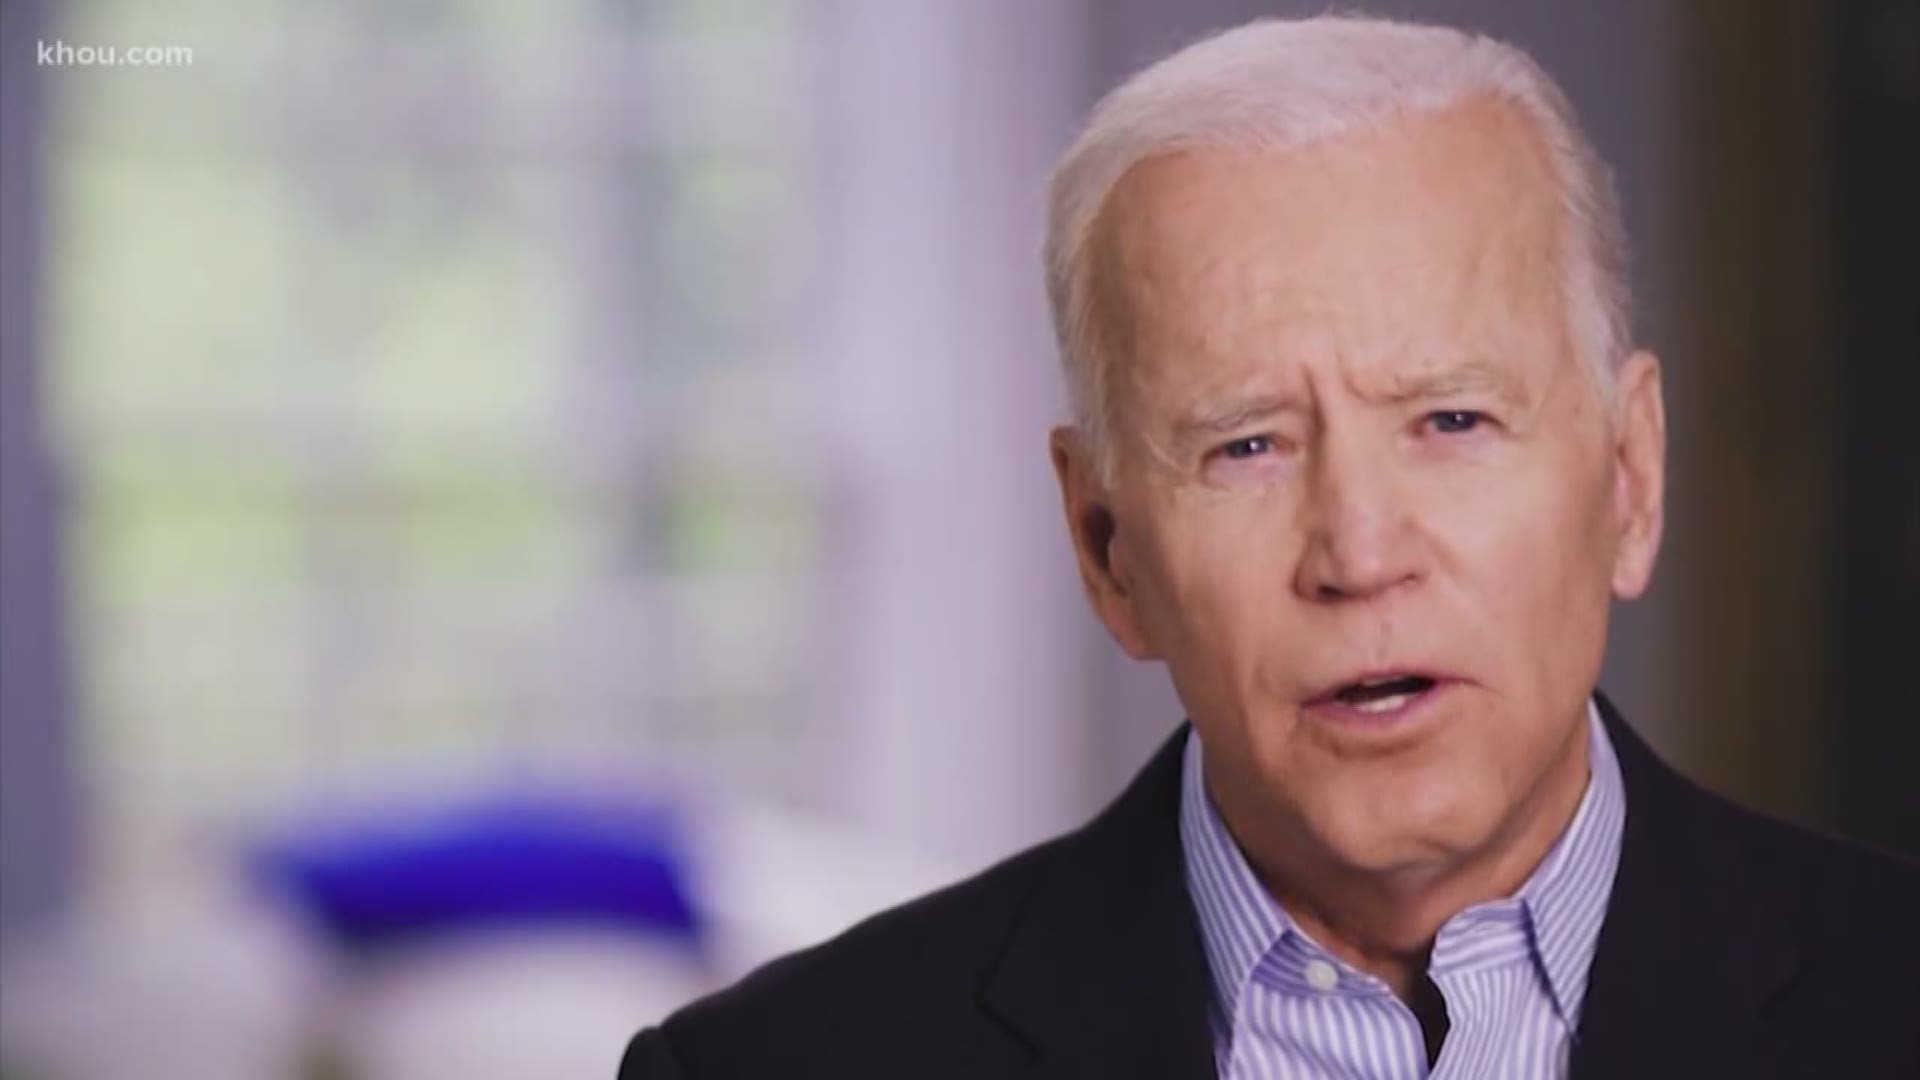 Former vice president Joe Biden is headed to Texas for the first time since announcing his 2020 presidential bid.